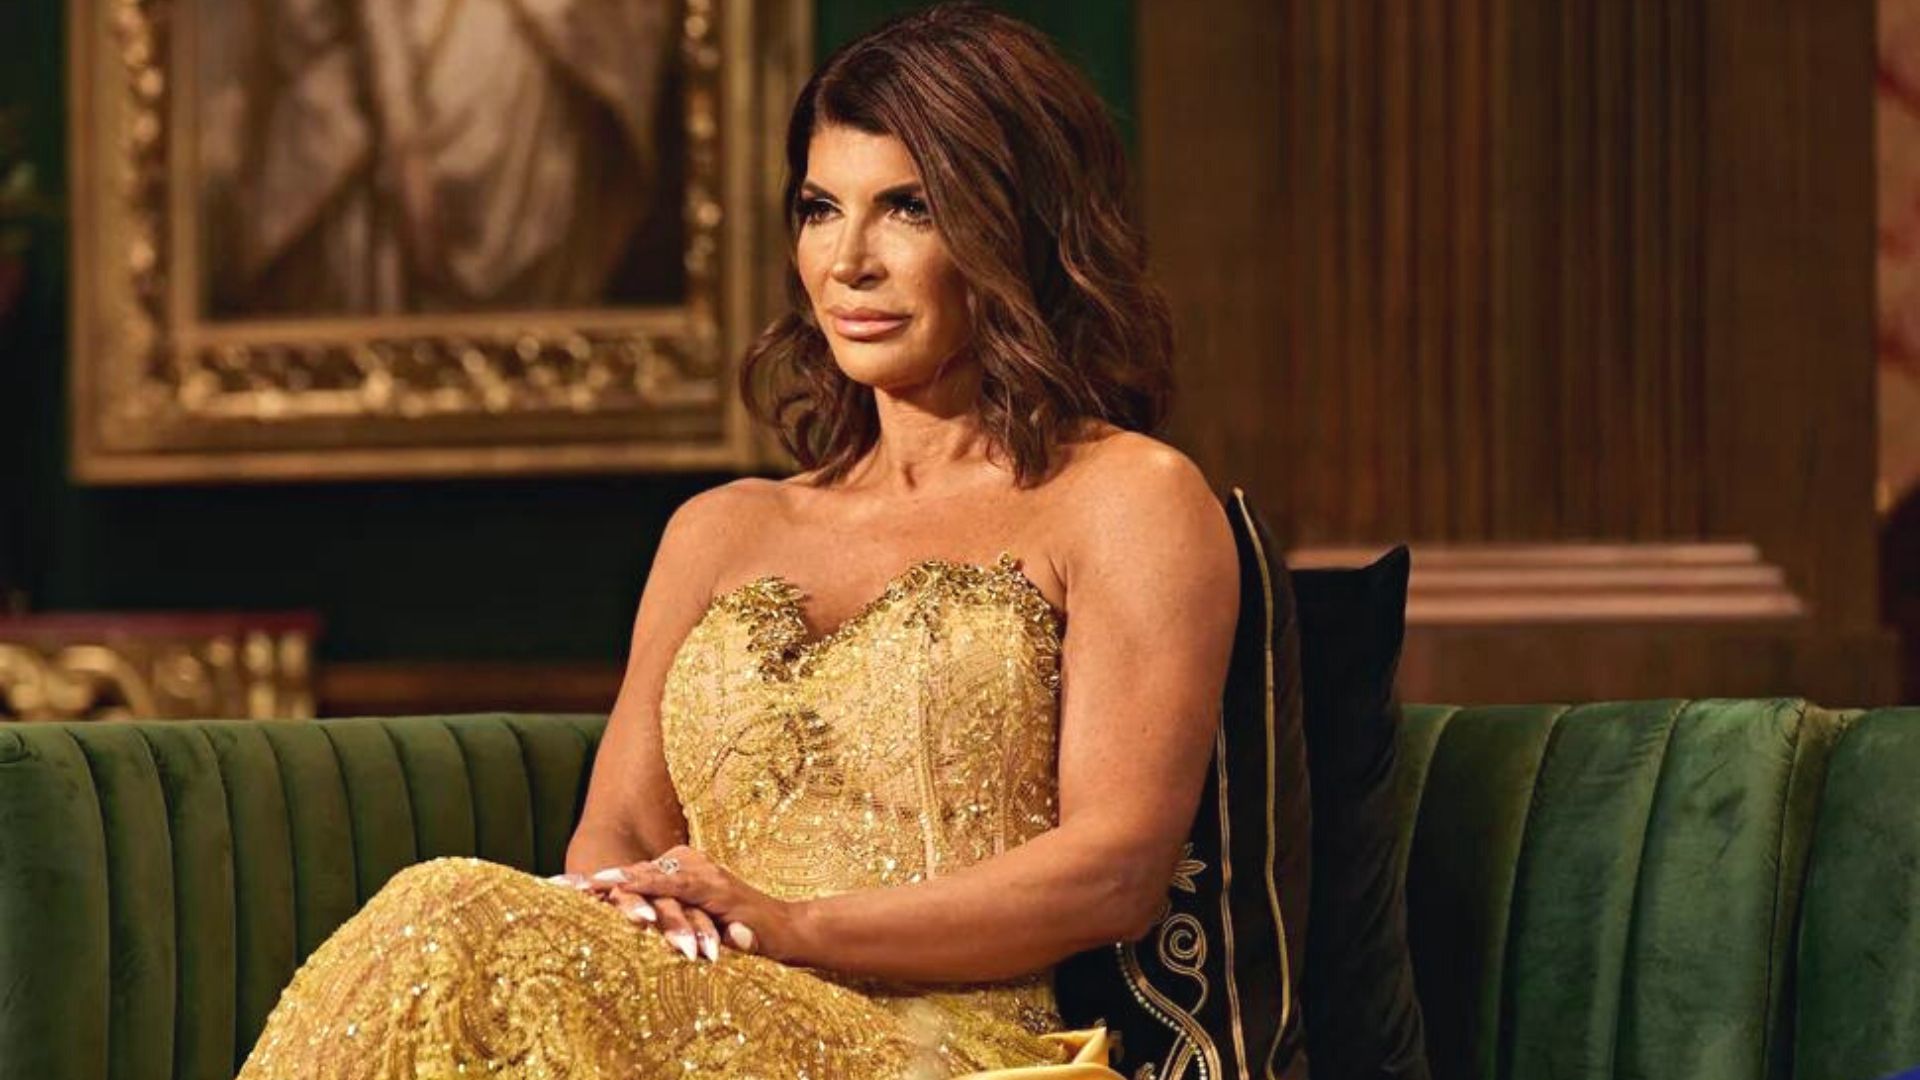 Real Housewives of New Jersey season 13 next episode and more What to Watch picture